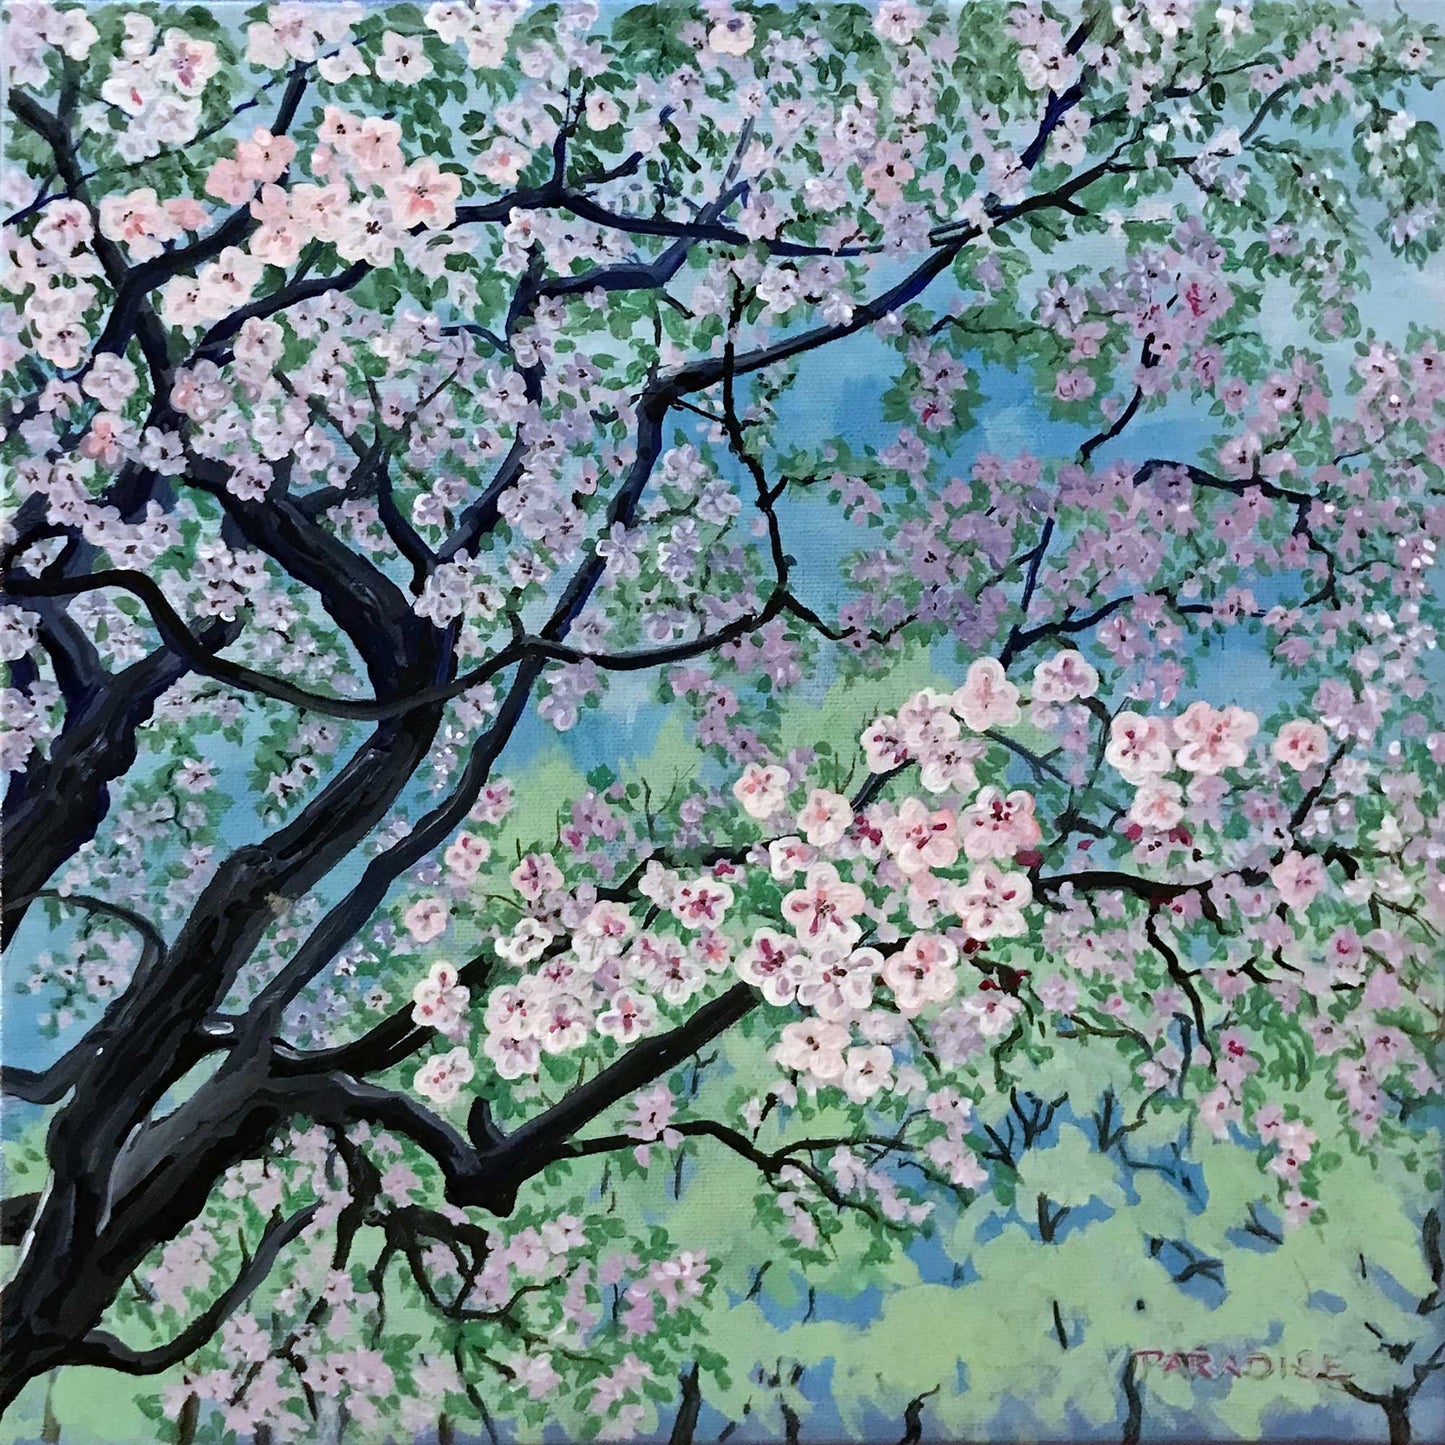 Blossom tree, apple orchard blooming flowers, original painting by a professional canadian landscape artist. visual art ready to hang on your wall.